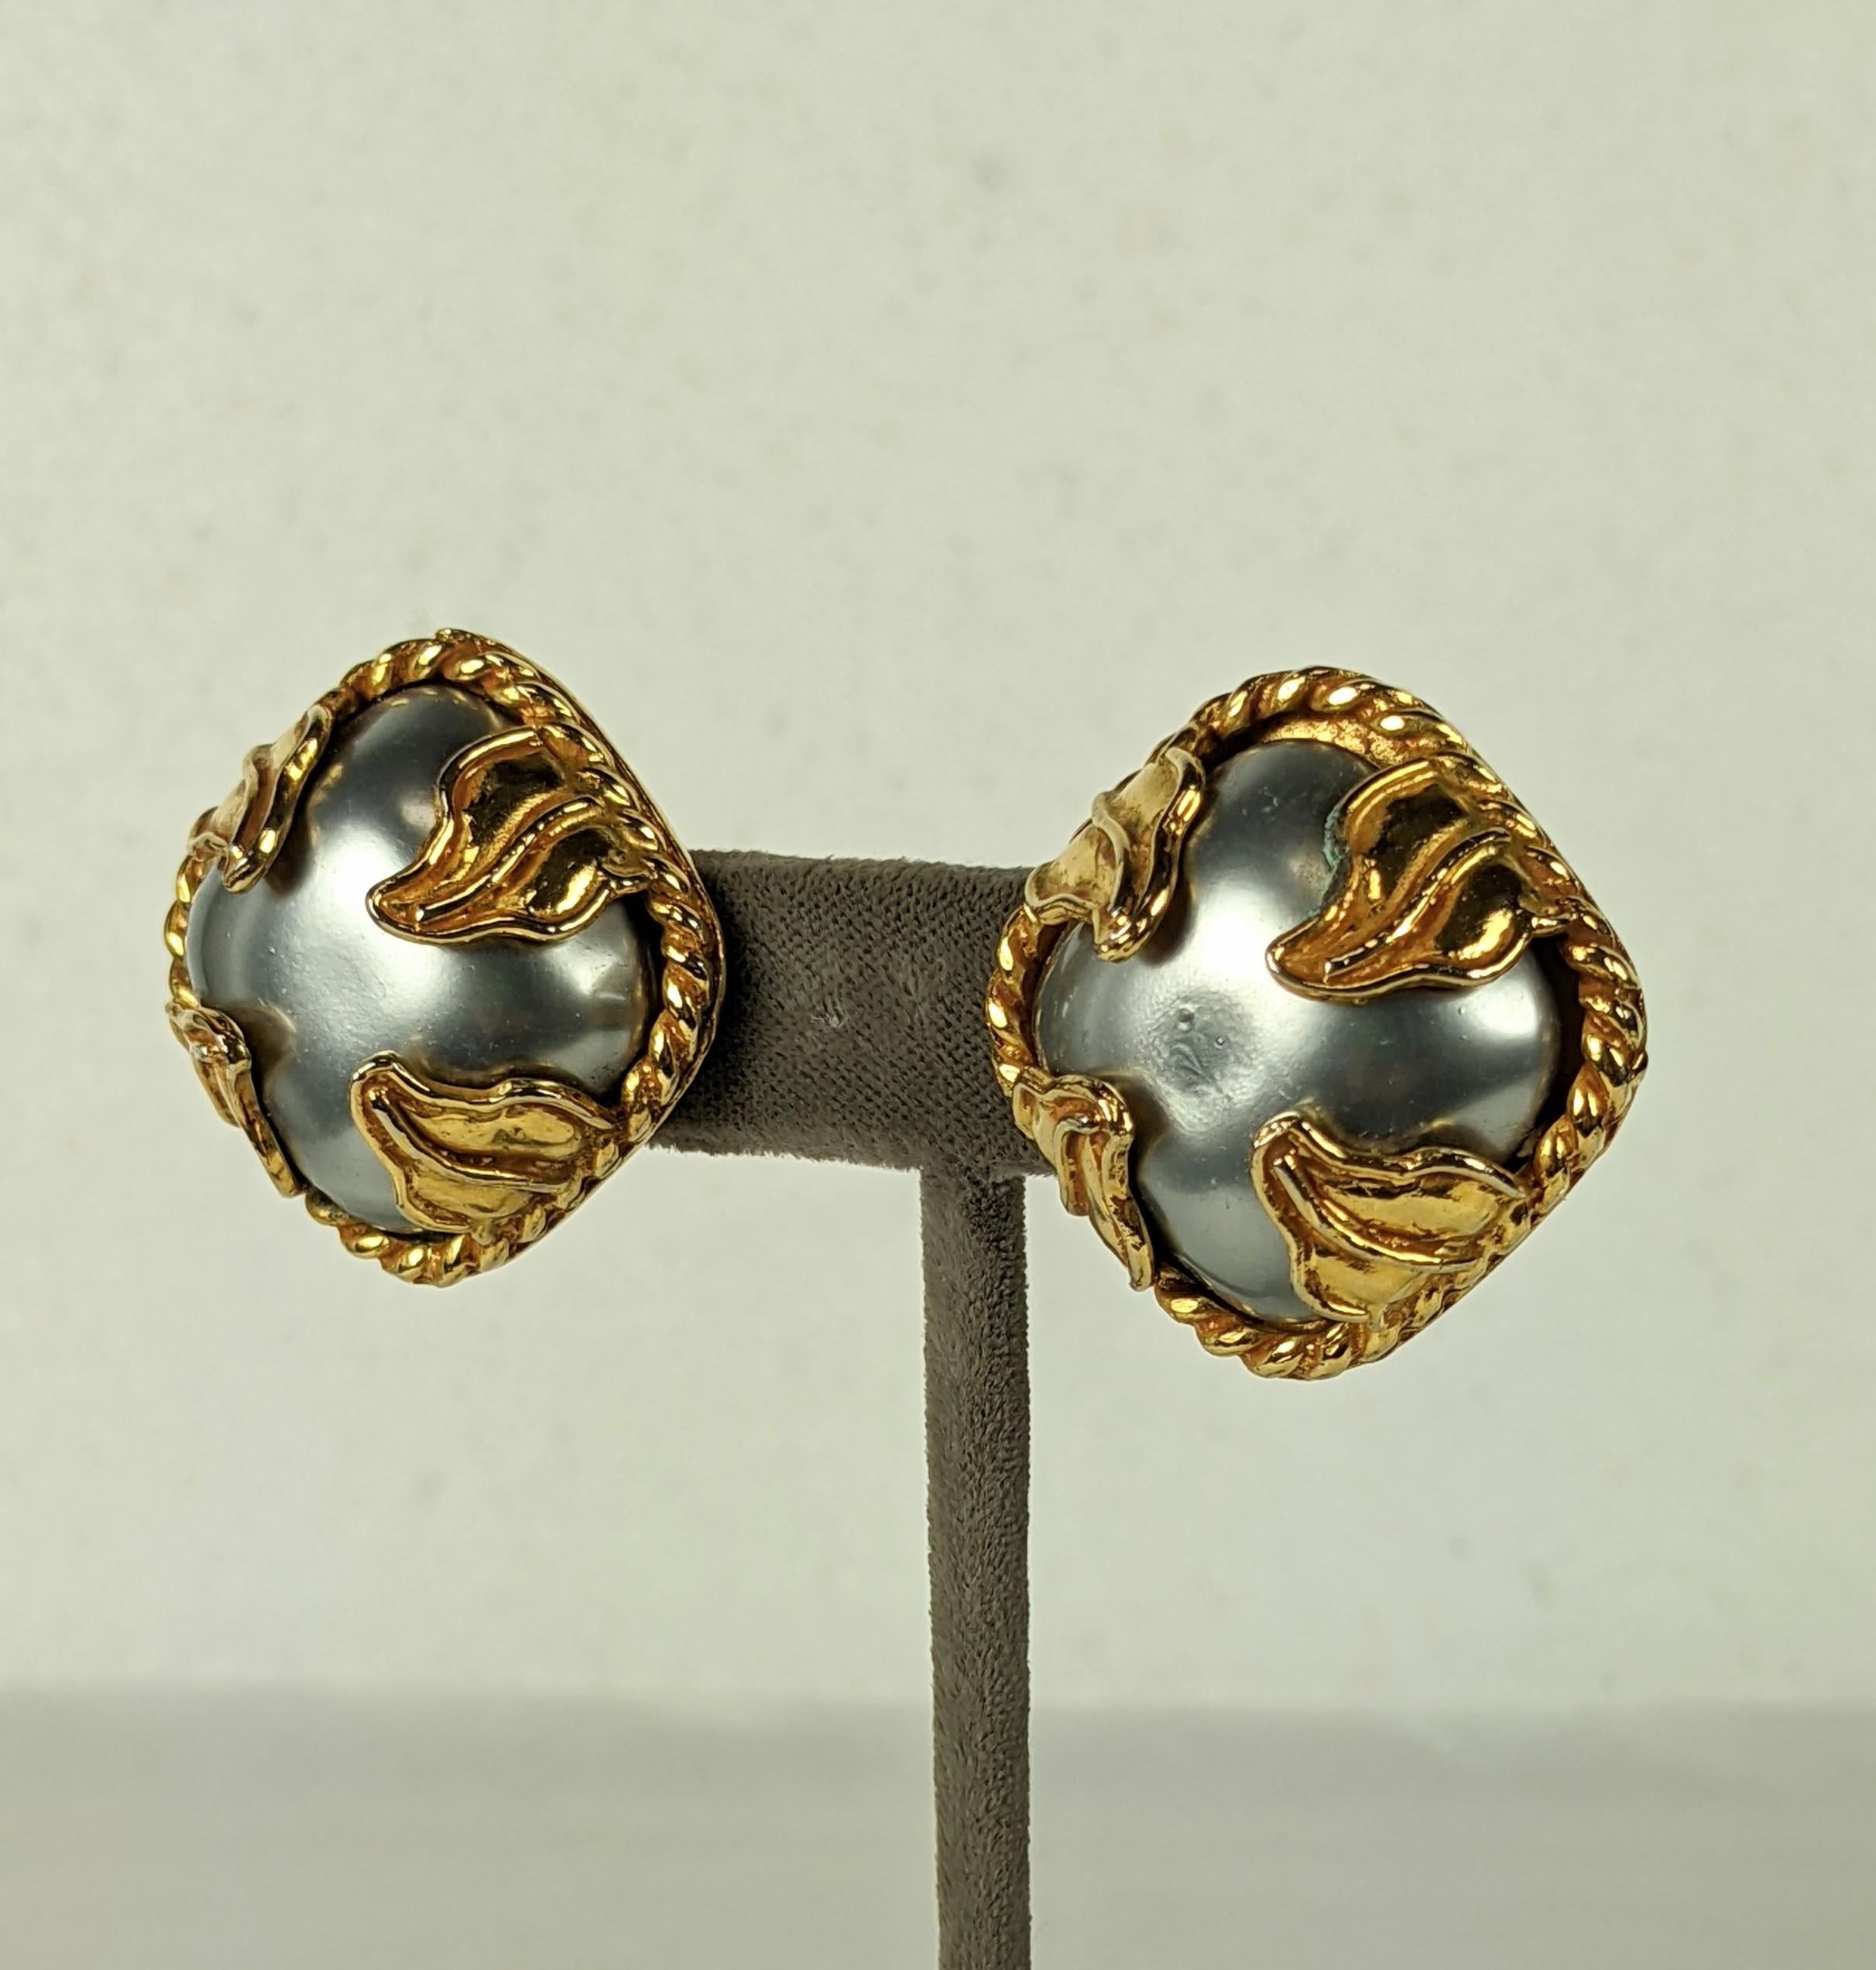 Elegant Dominique Aurientis Gray Pearl Earrings from the 1980's. Square cabochon faux gray pearls are set within large gilt leaf form prongs with twisted gold borders. 1.25